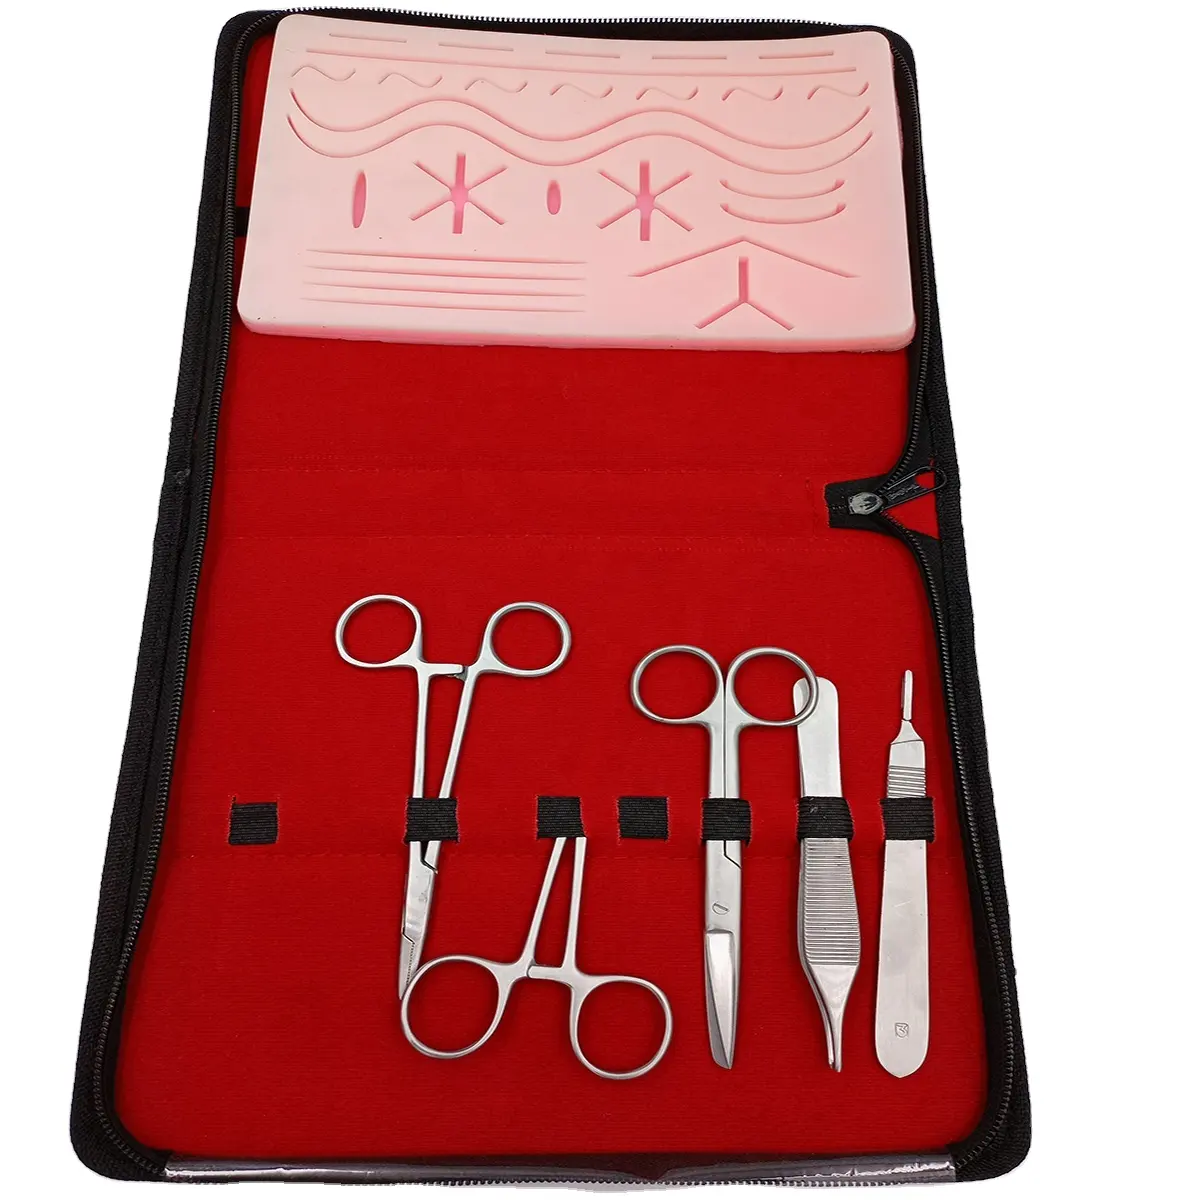 Training Suture Tool Red Kit With Extra Large Suture Pad | Suture Tool Kit Set | Training Suture Pad By Pissco Instruments